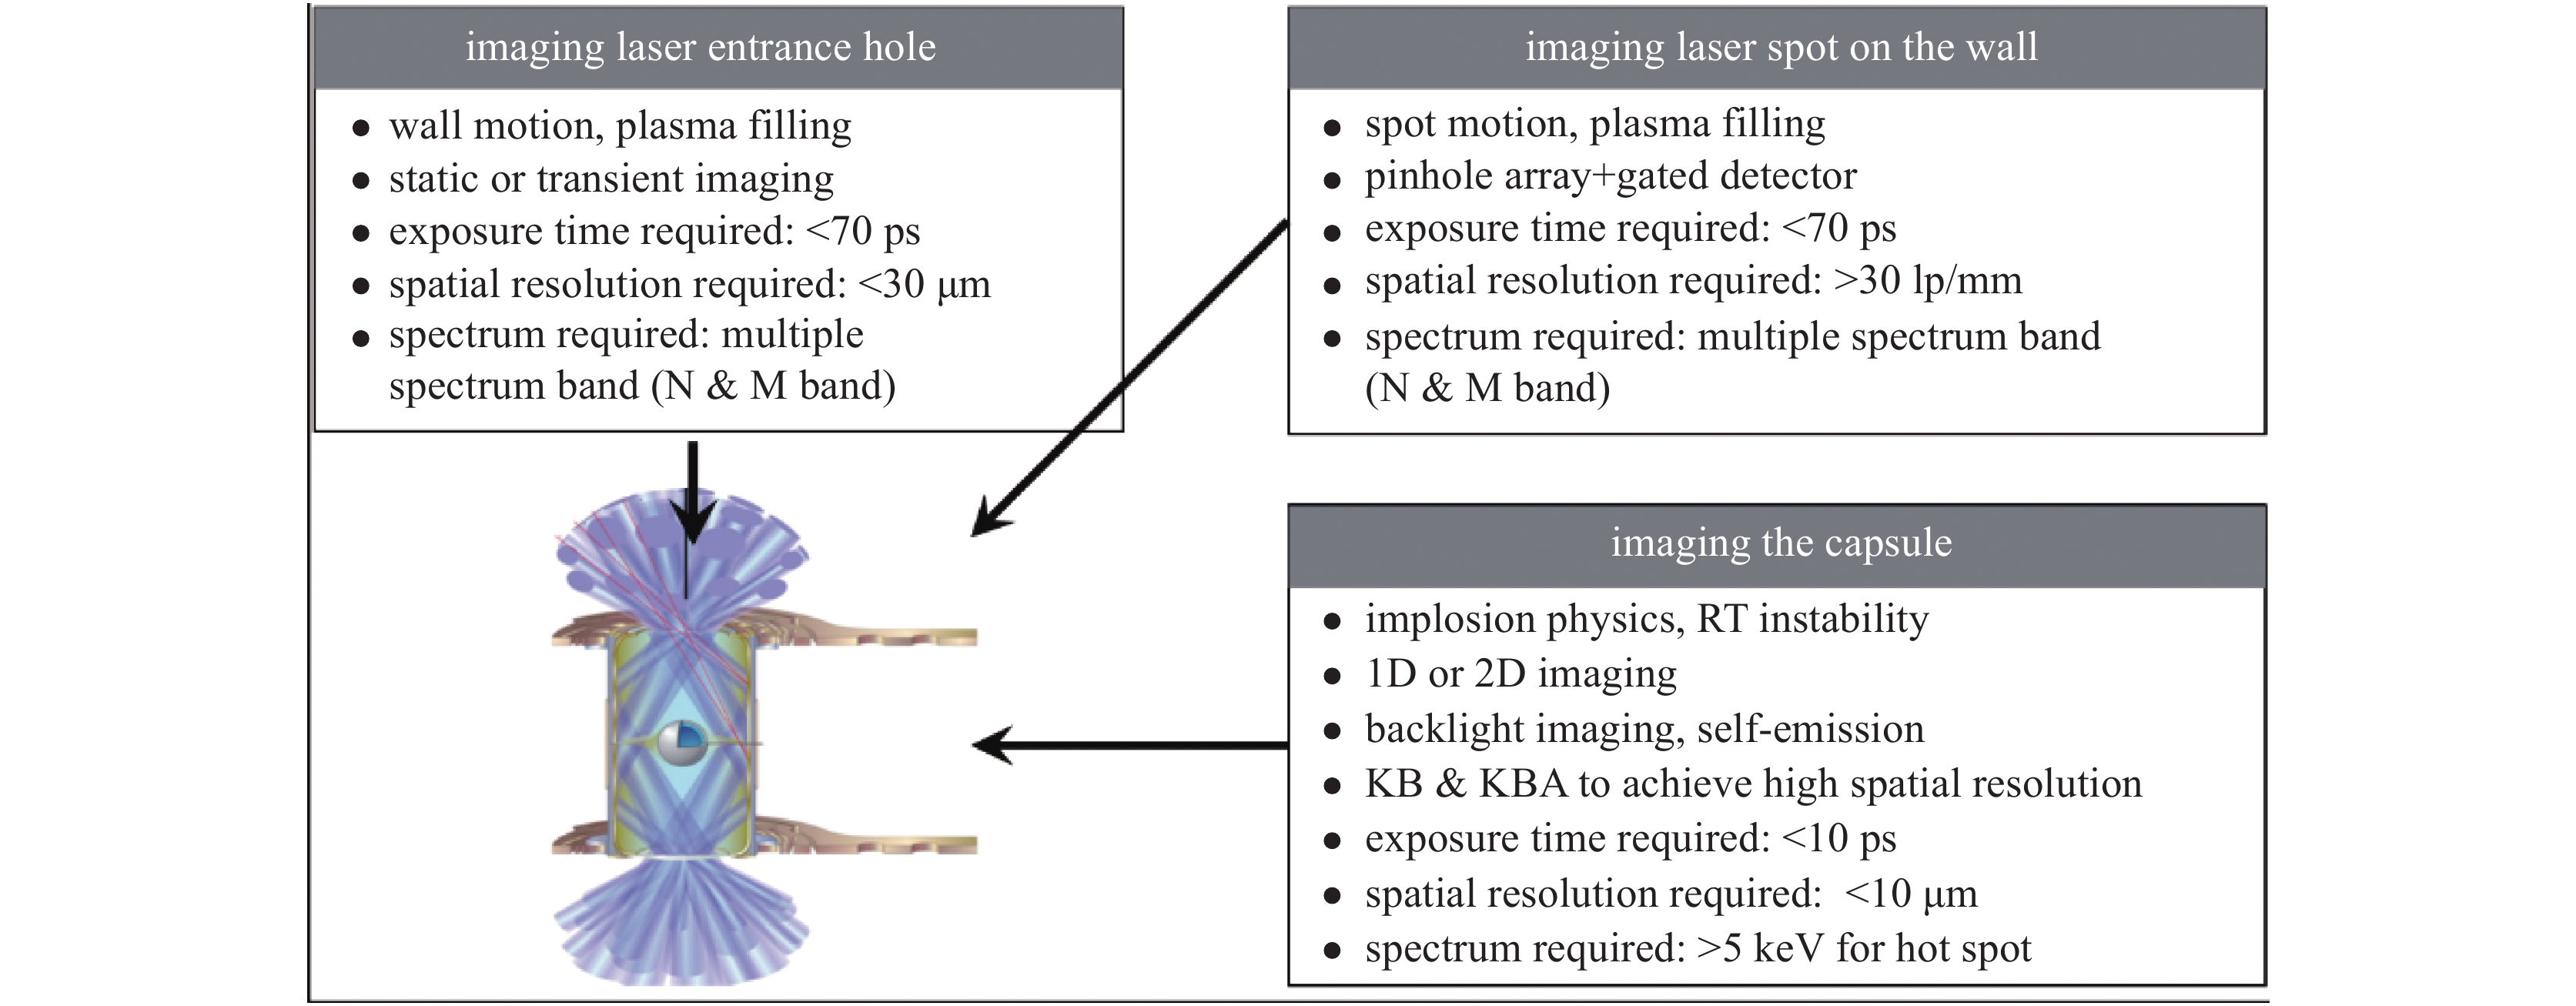 Application of X-ray high-speed photography diagnostic technology in indirect drive inertial confinement fusion (ICF)